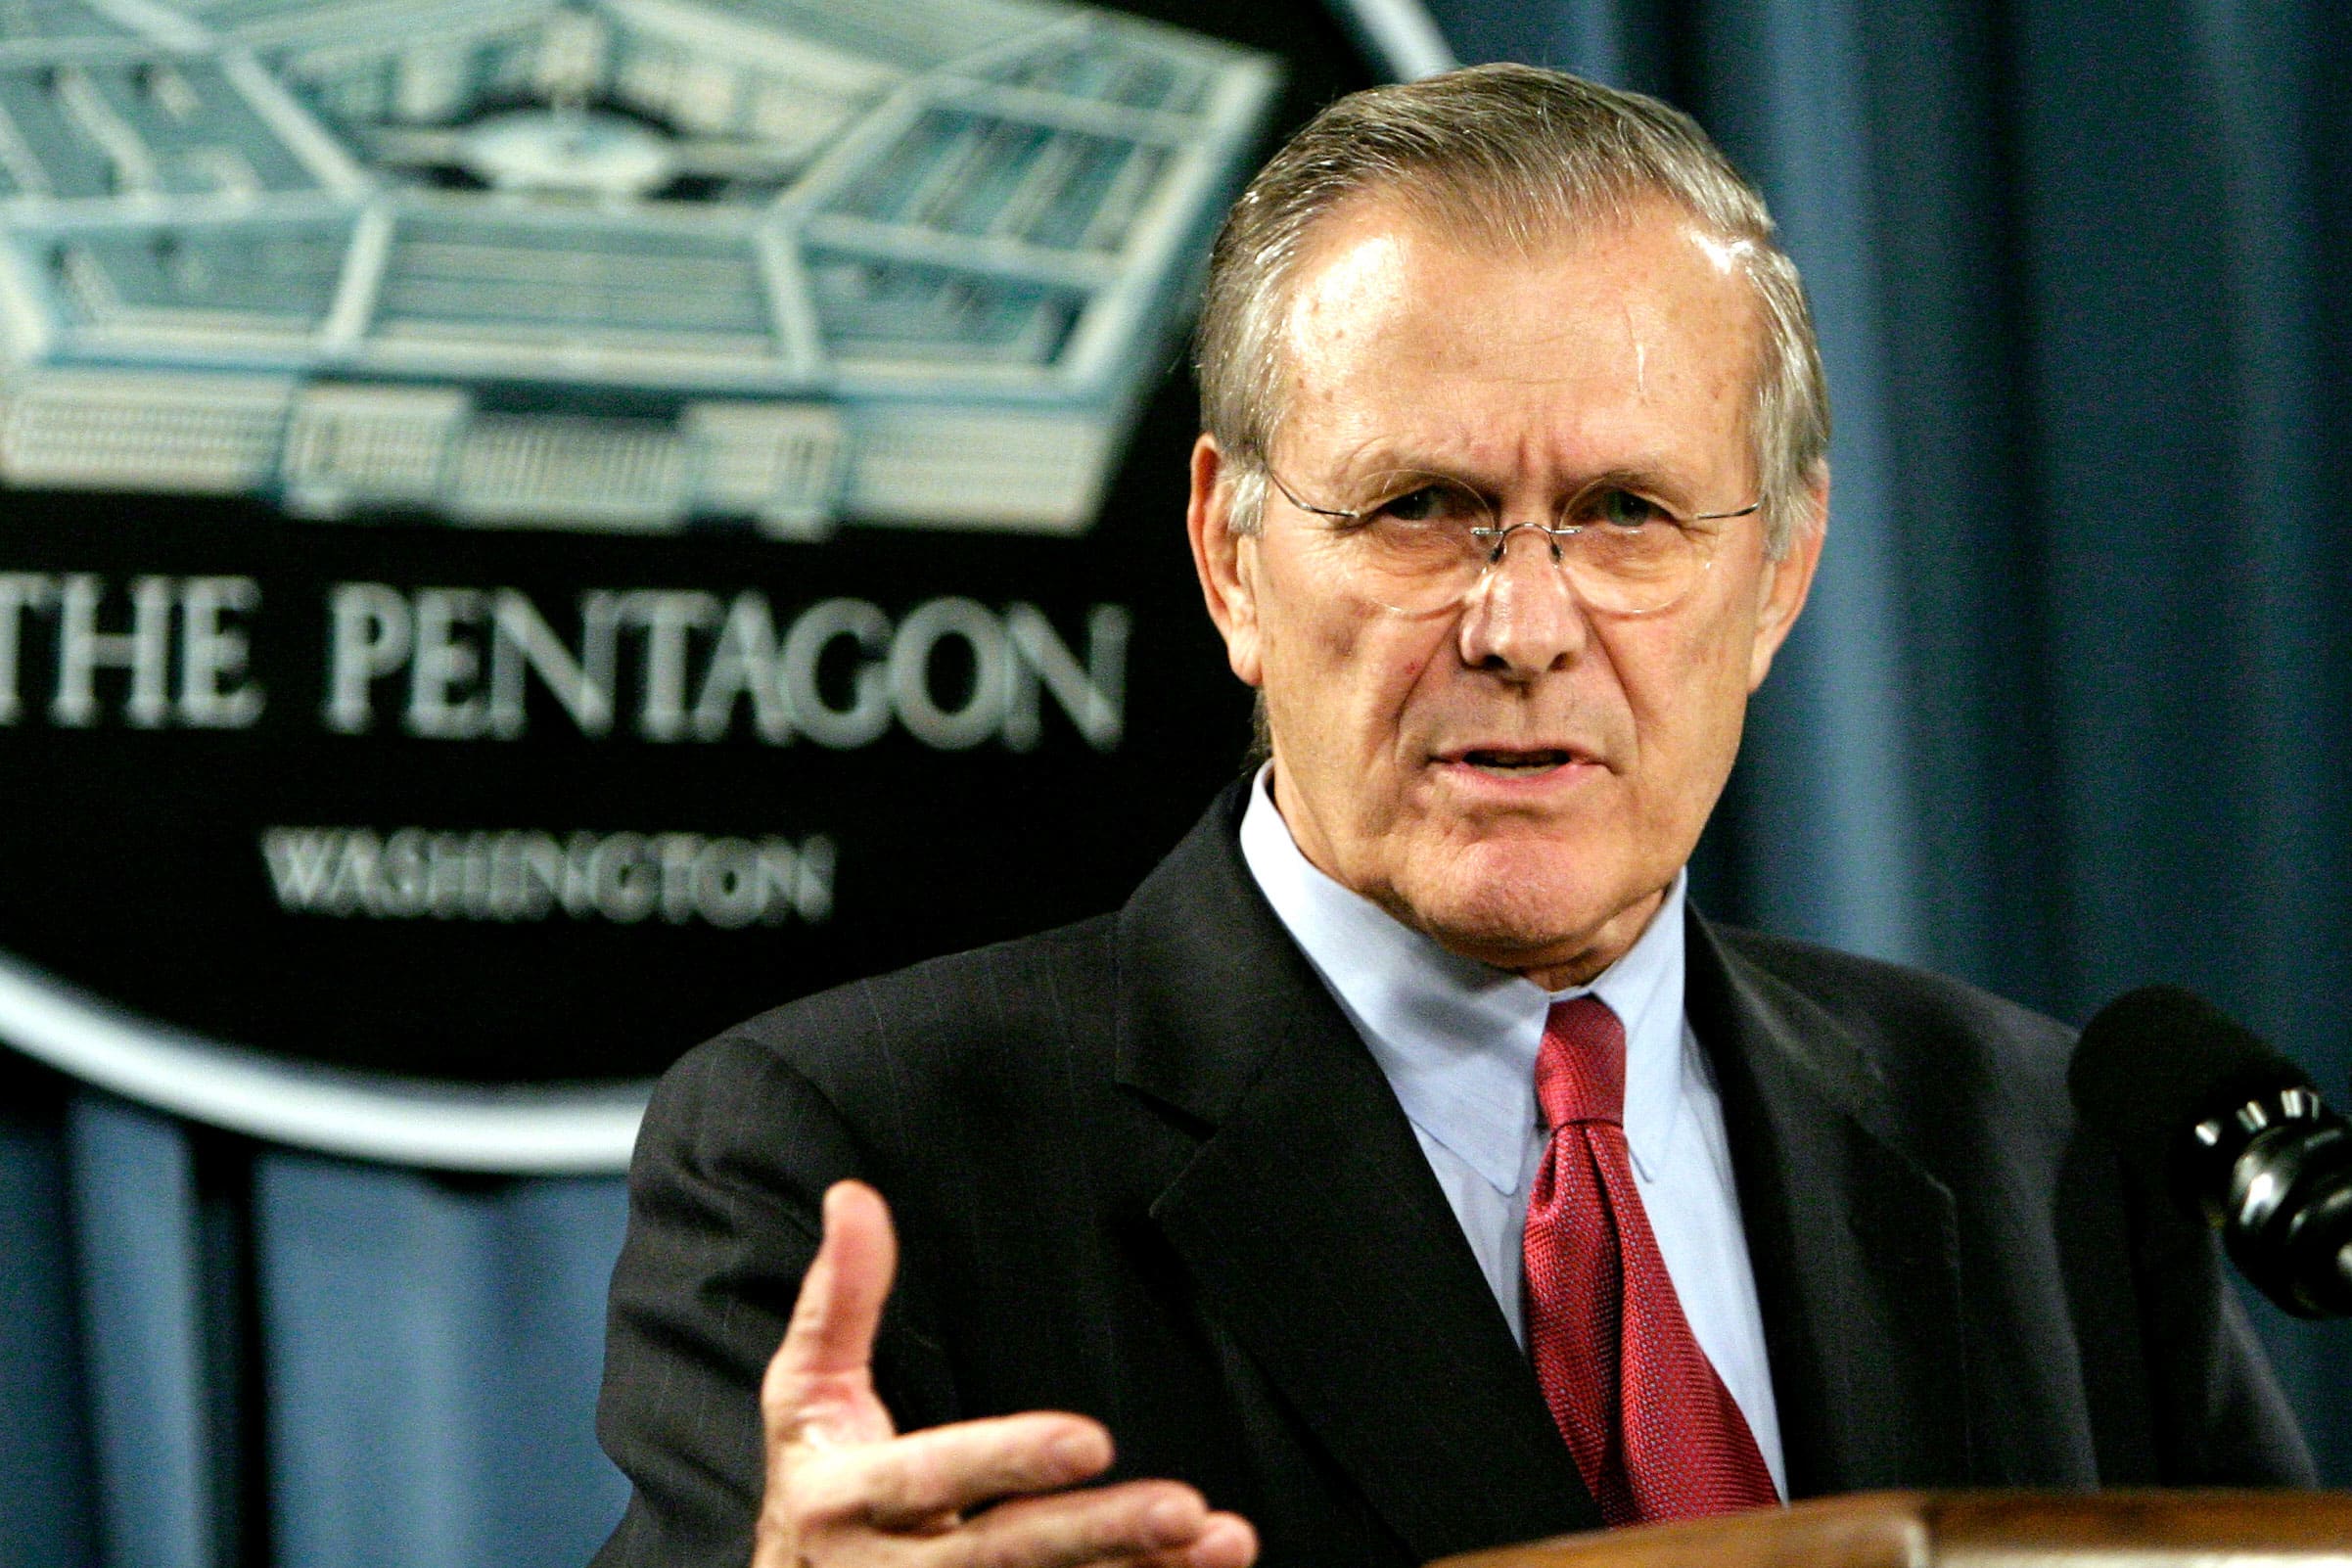 WASHINGTON – Former Defense Secretary Donald Rumsfeld has died at the age of 88, according to a statement released Wednesday from his family. "